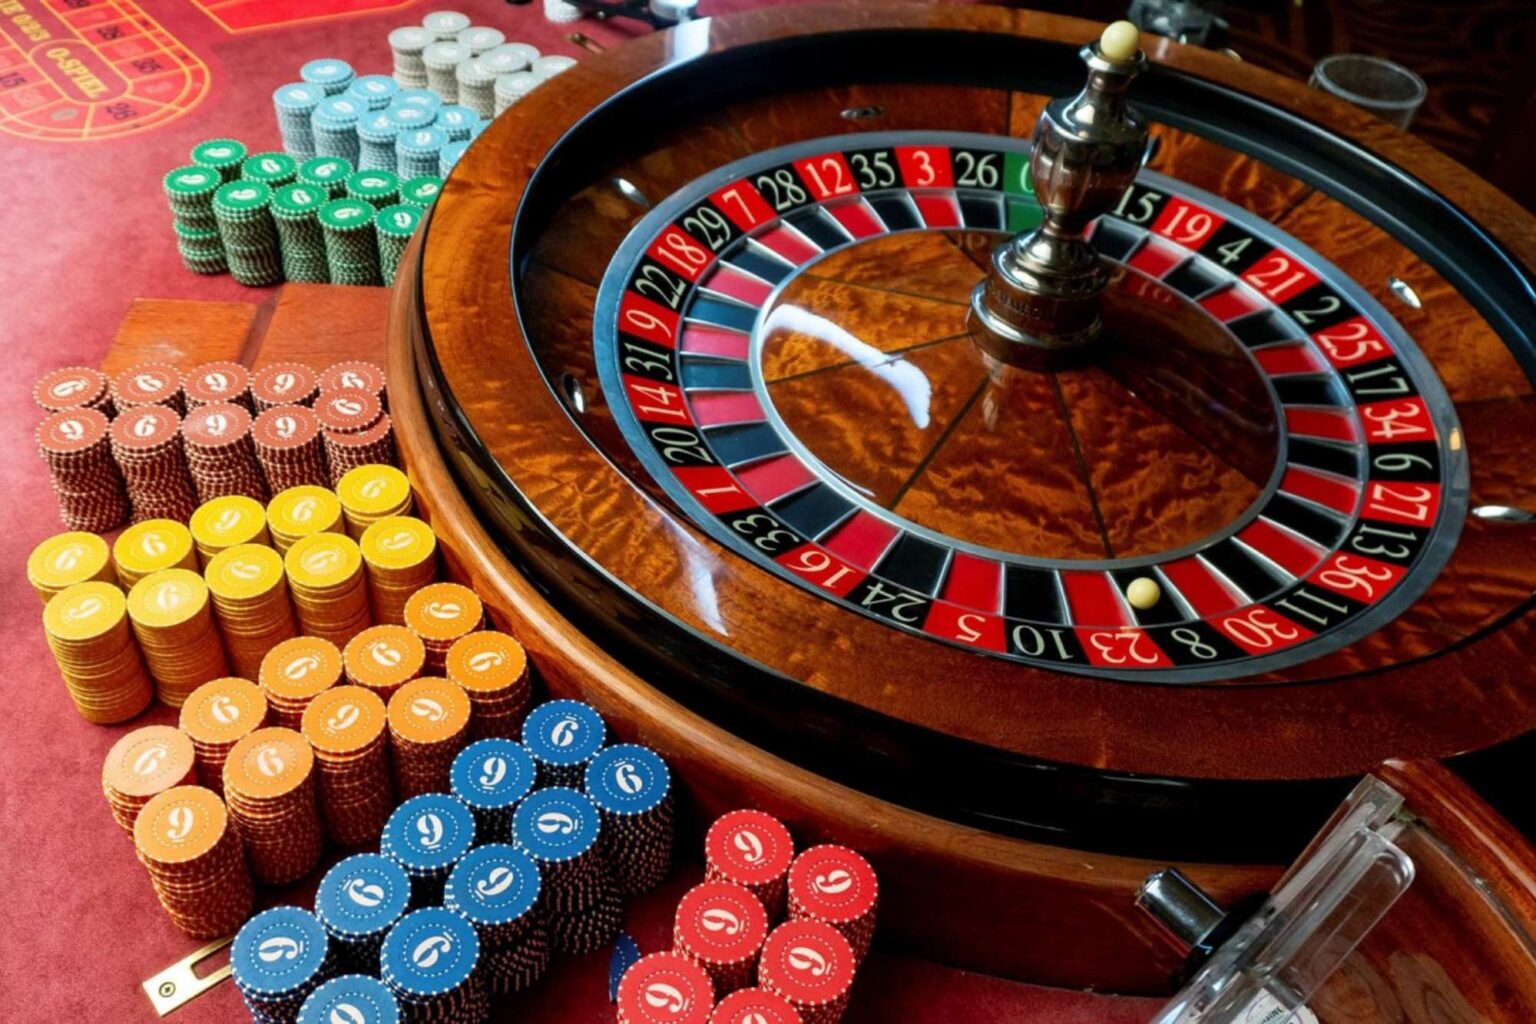 Finding the perfect online casino can be tough. Here are some tips on how to discover the best rated gambling options.